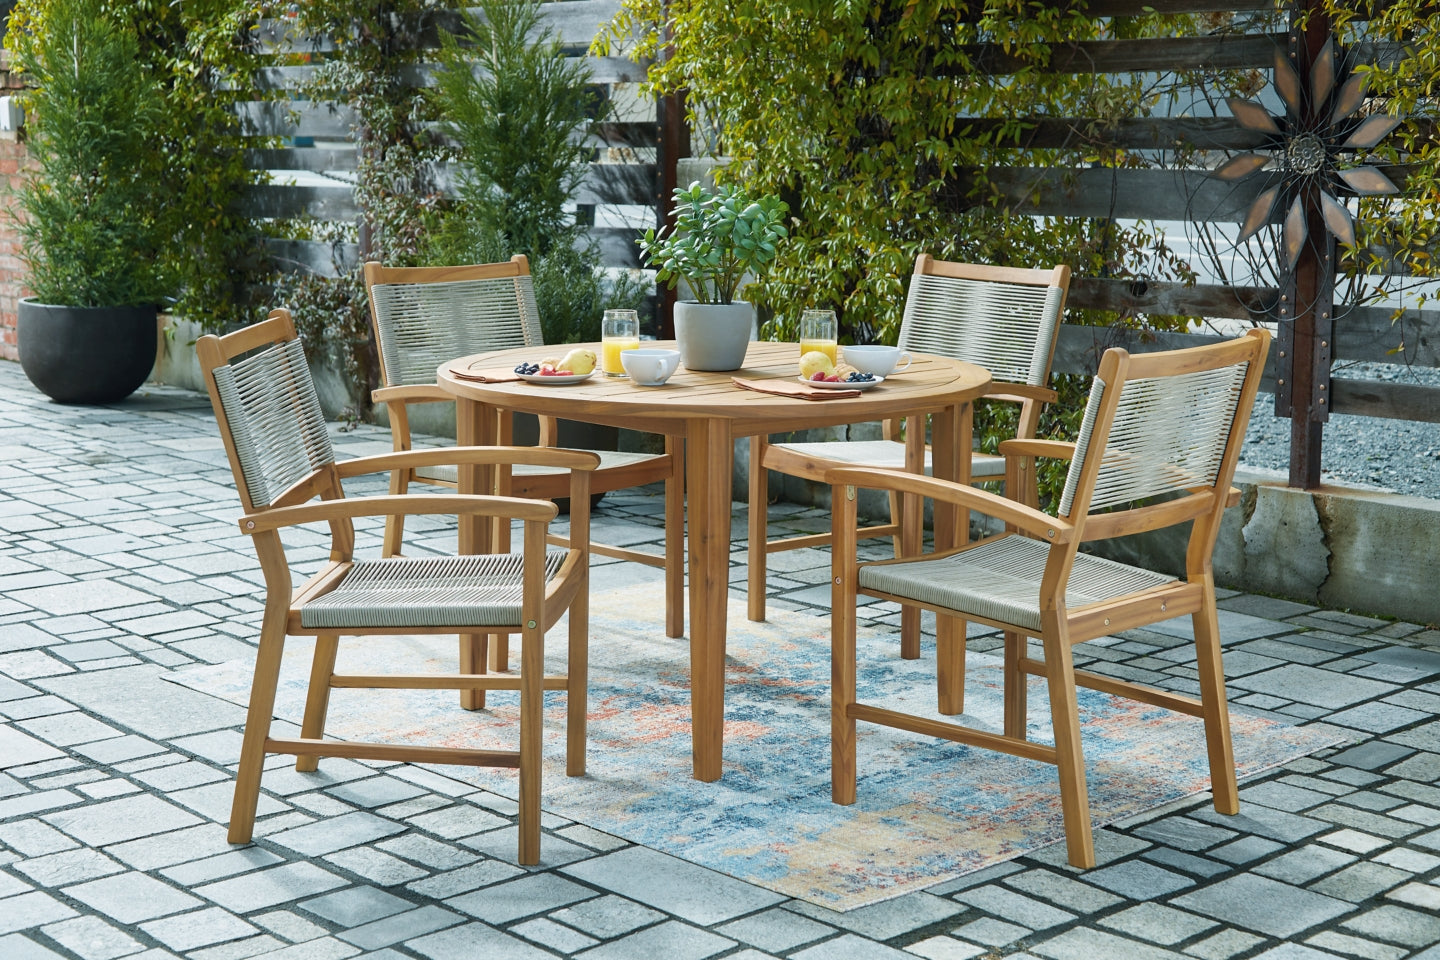 Janiyah Outdoor Dining Table and 4 Chairs - PKG013835 - furniture place usa